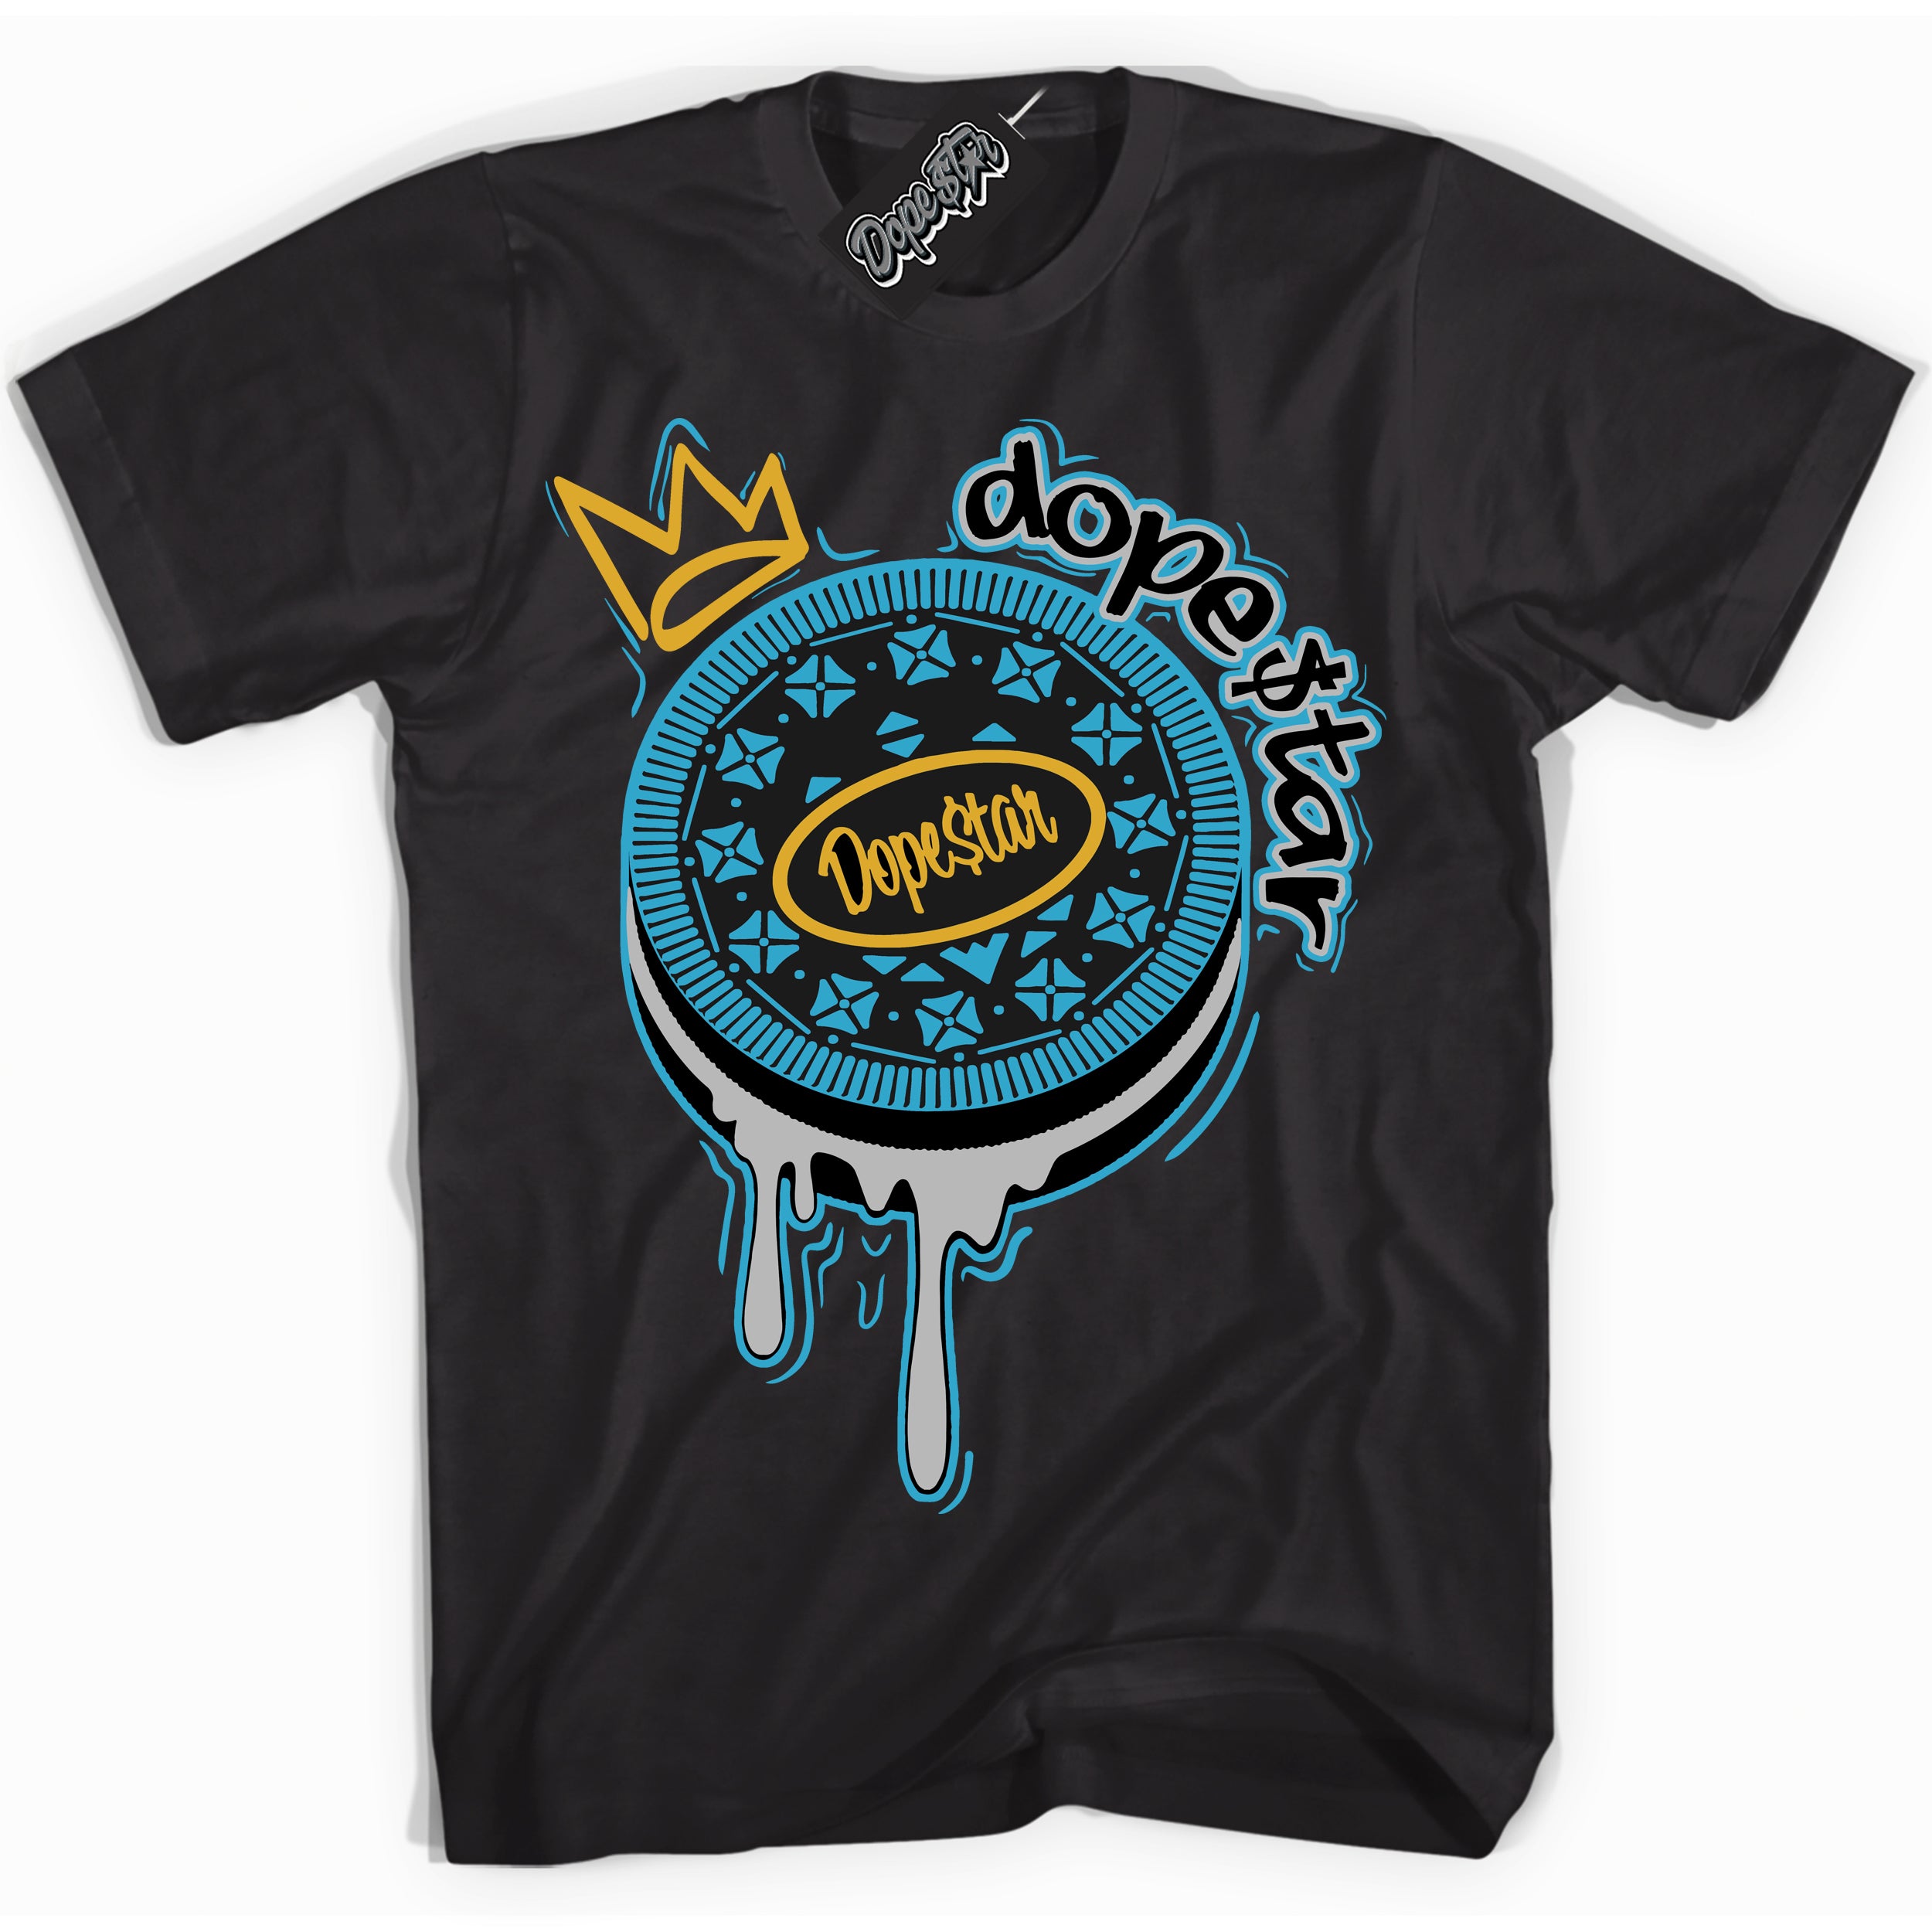 Cool Black Shirt with “ Oreo DS” design that perfectly matches Aqua 5s Sneakers.